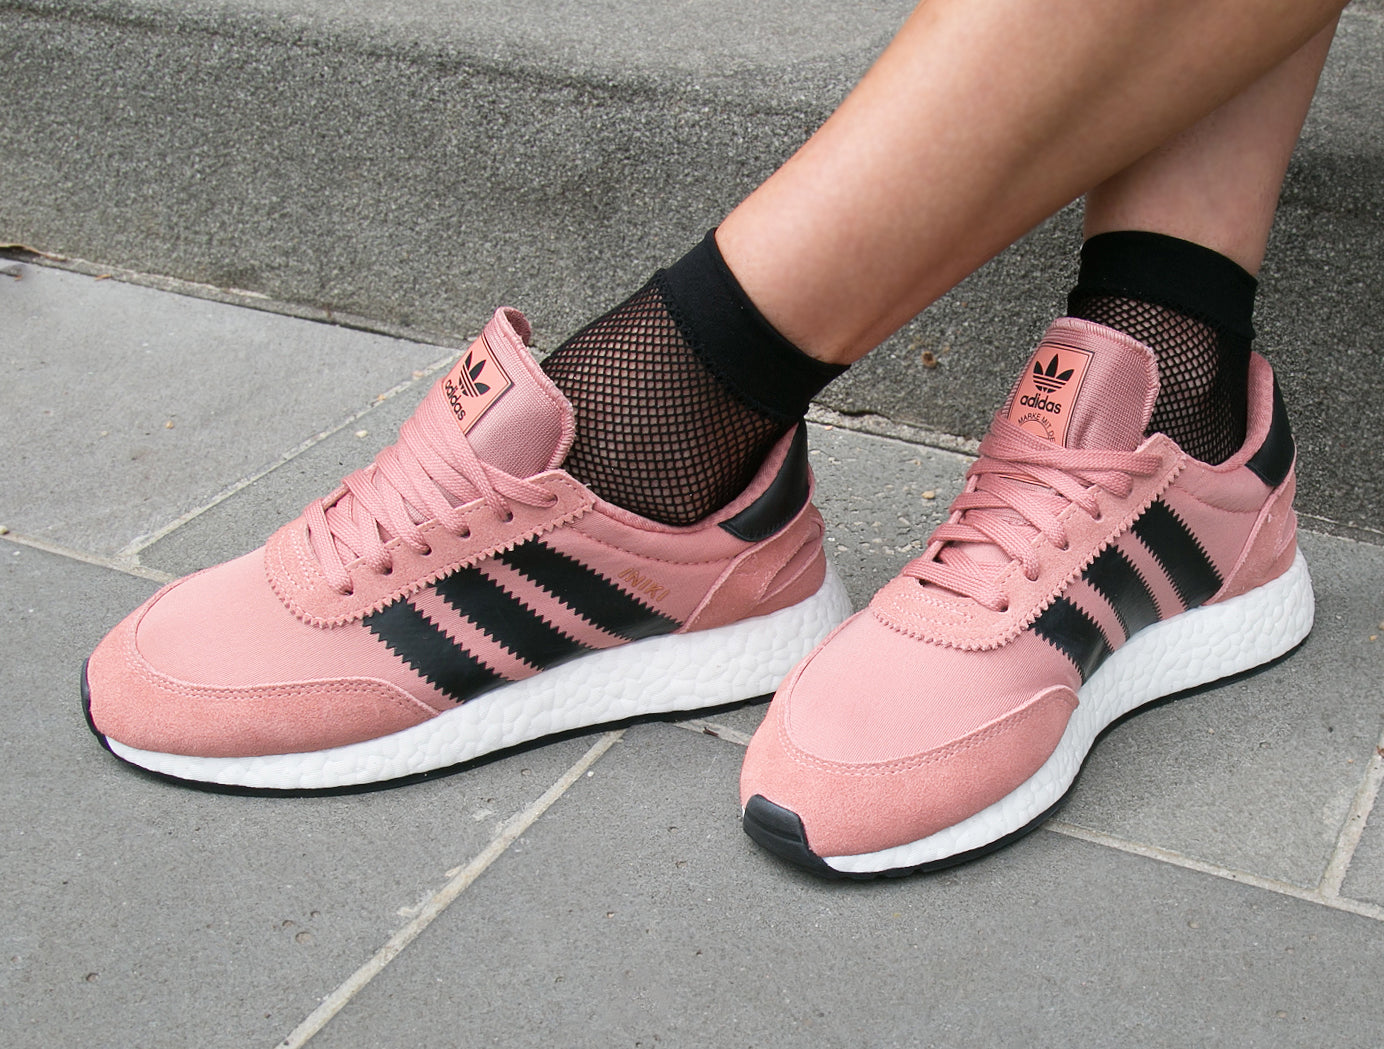 Adidas Iniki Raw Pink October 13 | RELEASES Finesse